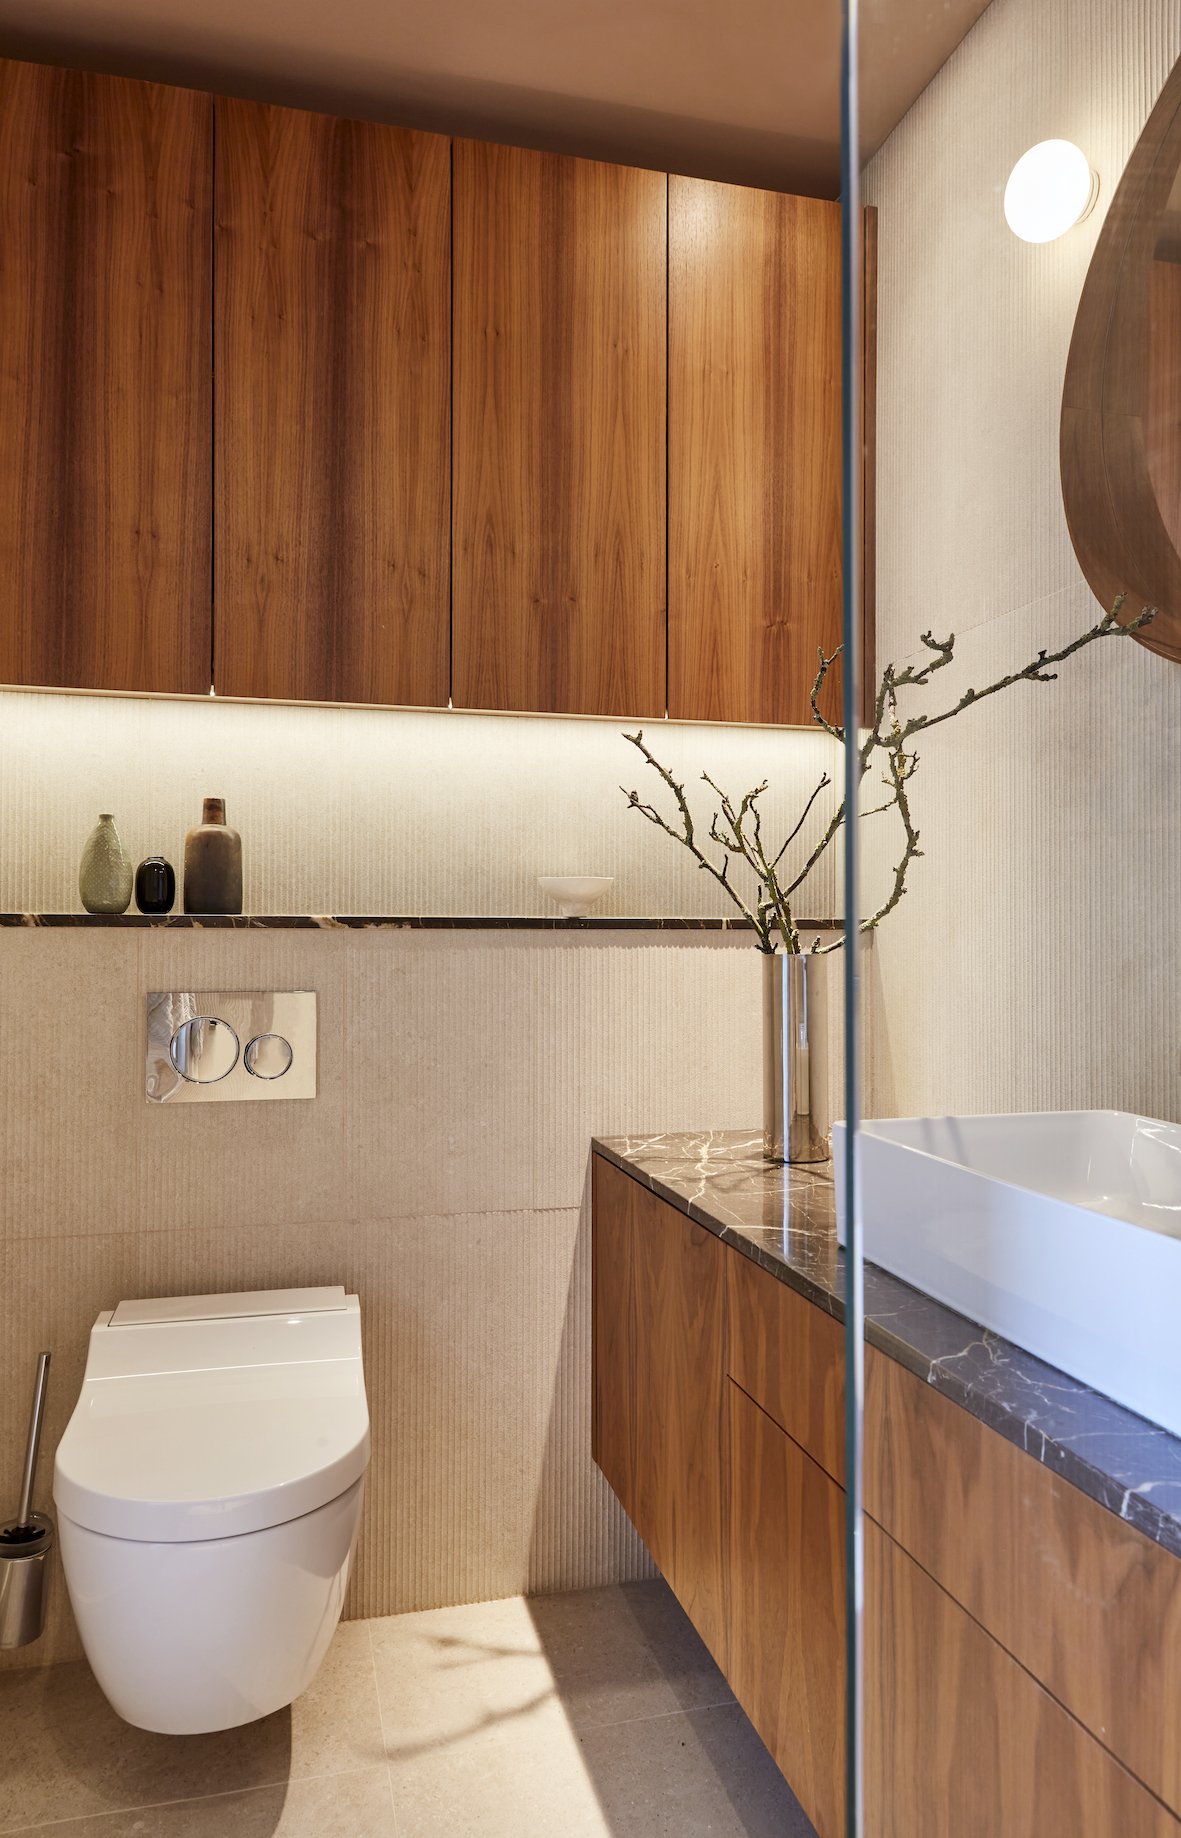 bathroom with Pleated tiles by Domus, Marble worktop and walnut cabinetry